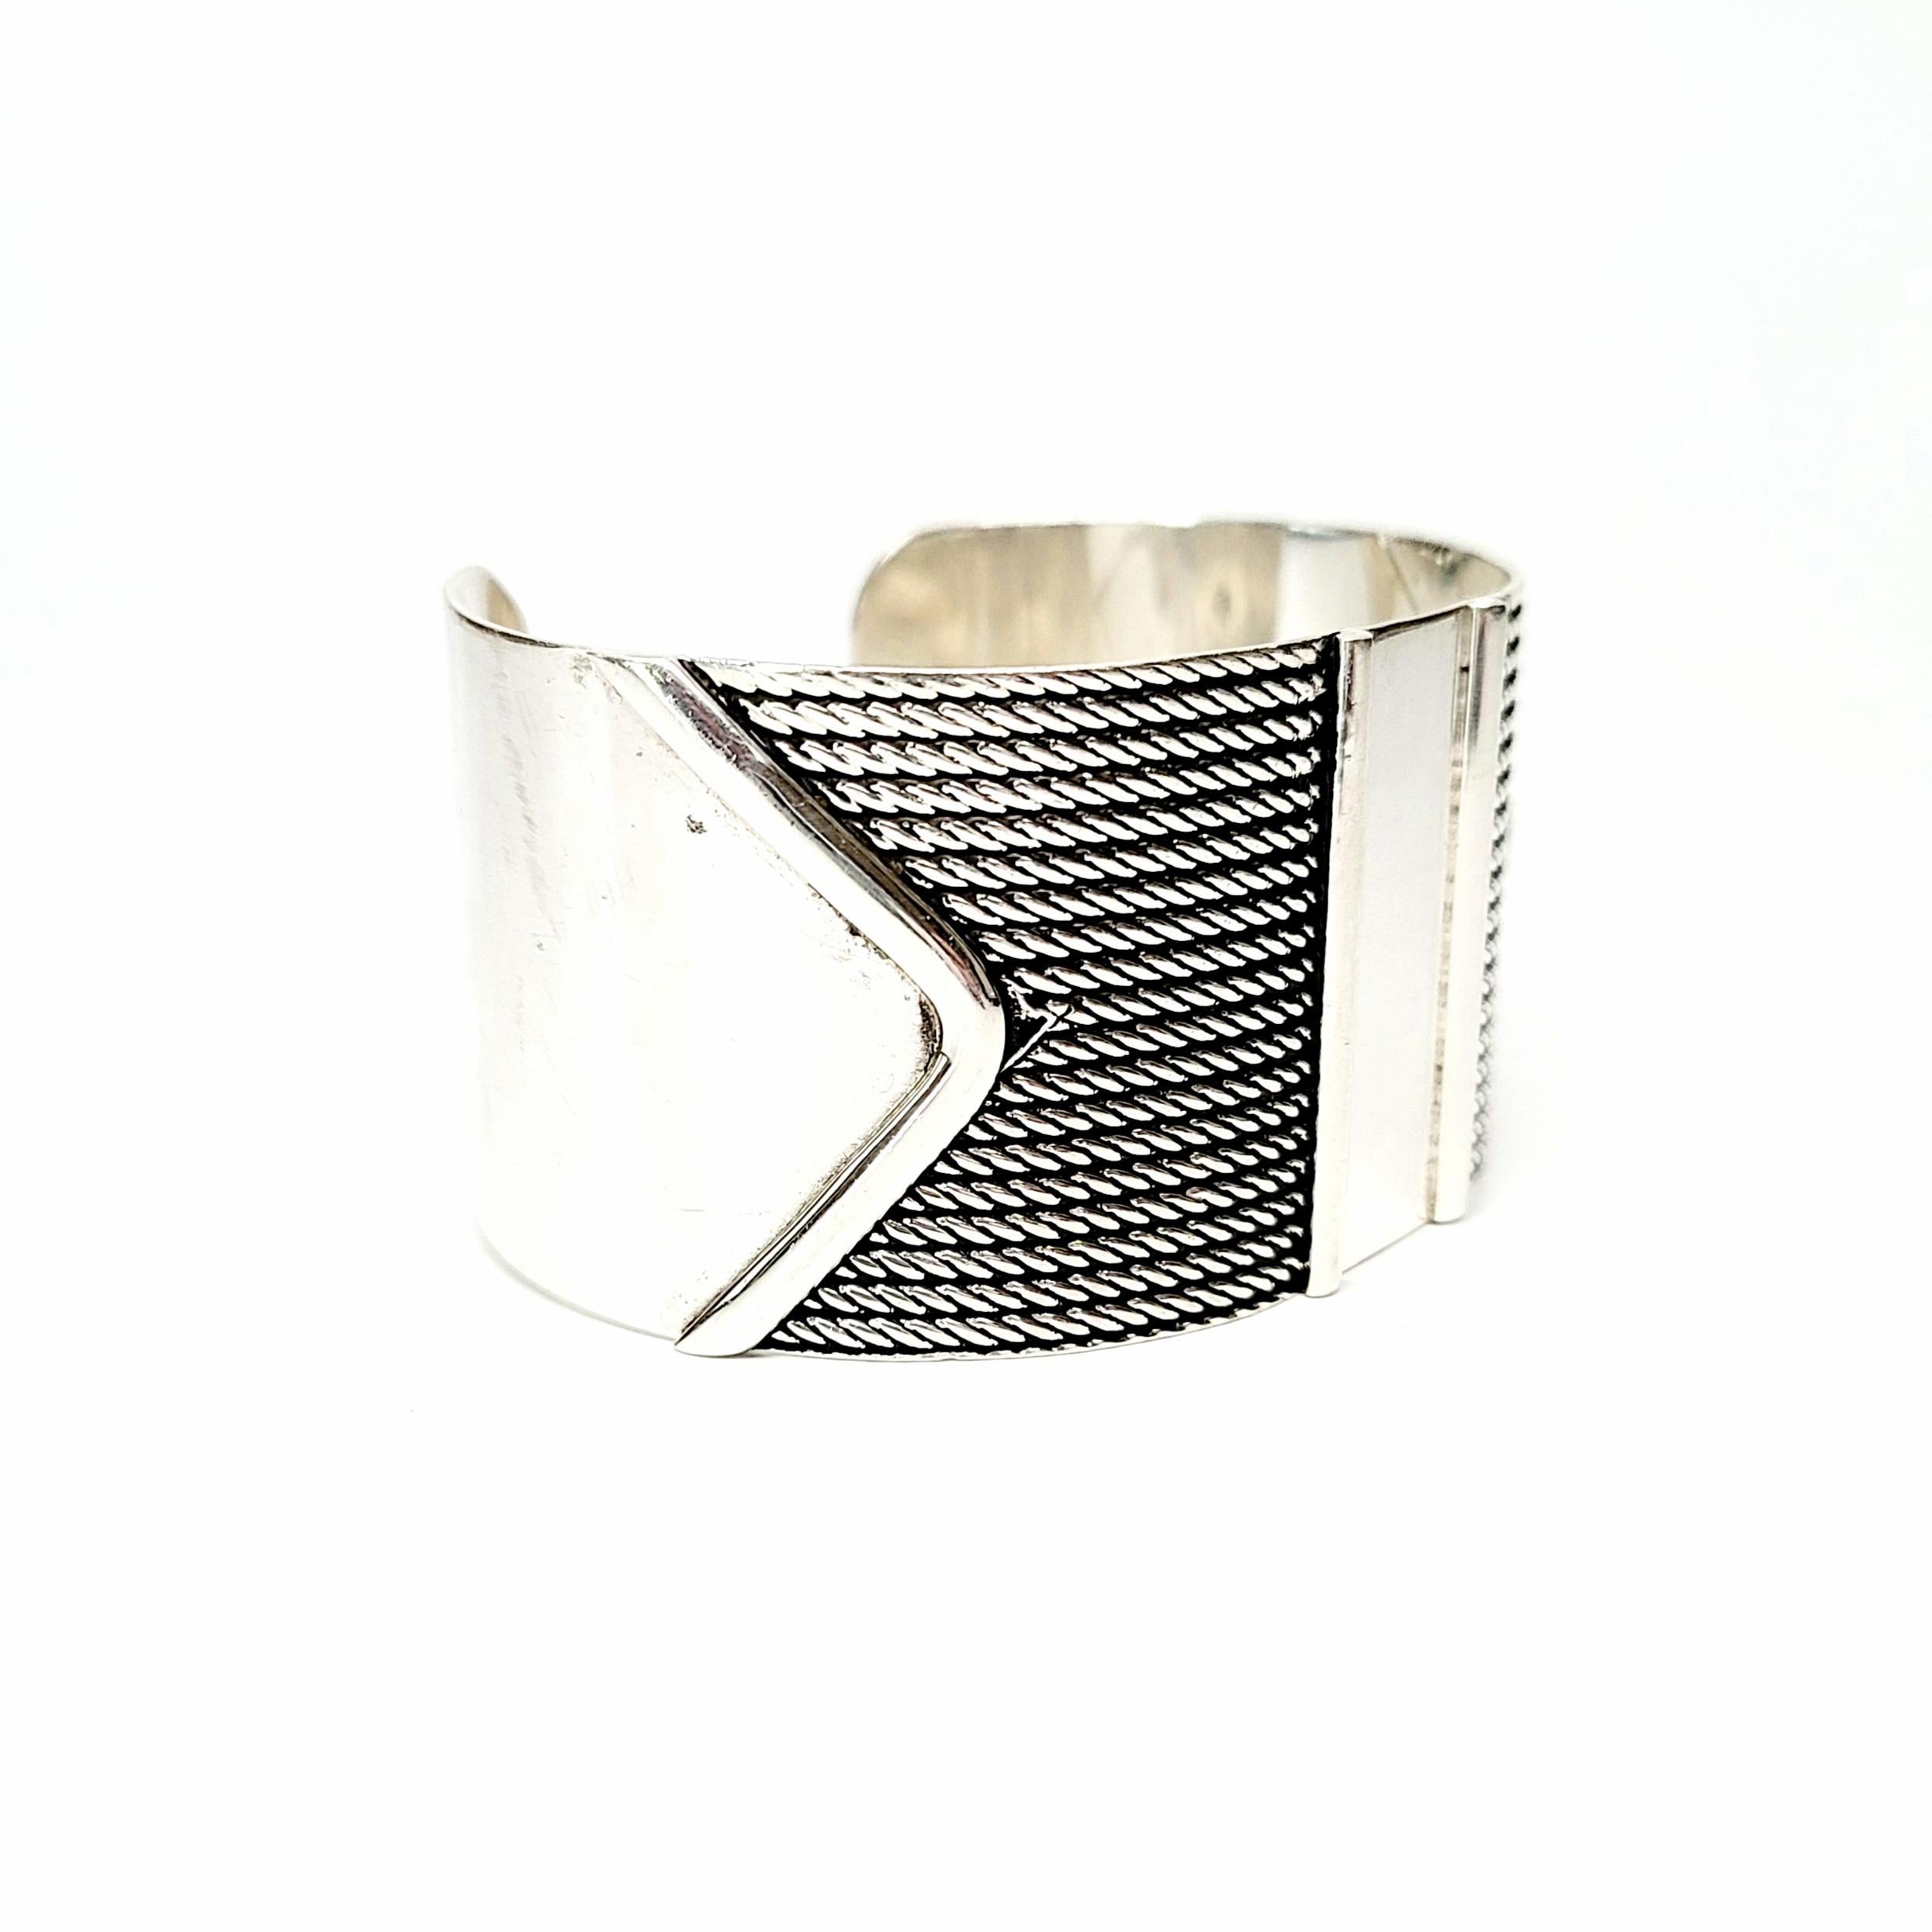 Sterling silver cuff bracelet by House of Bangles Mexico, signed HOB.

A modernist wide cuff bracelet with unique and interesting design featuring smooth, polished ends and center, combined with lines of twisted rope.

Measures approx 6 1/4